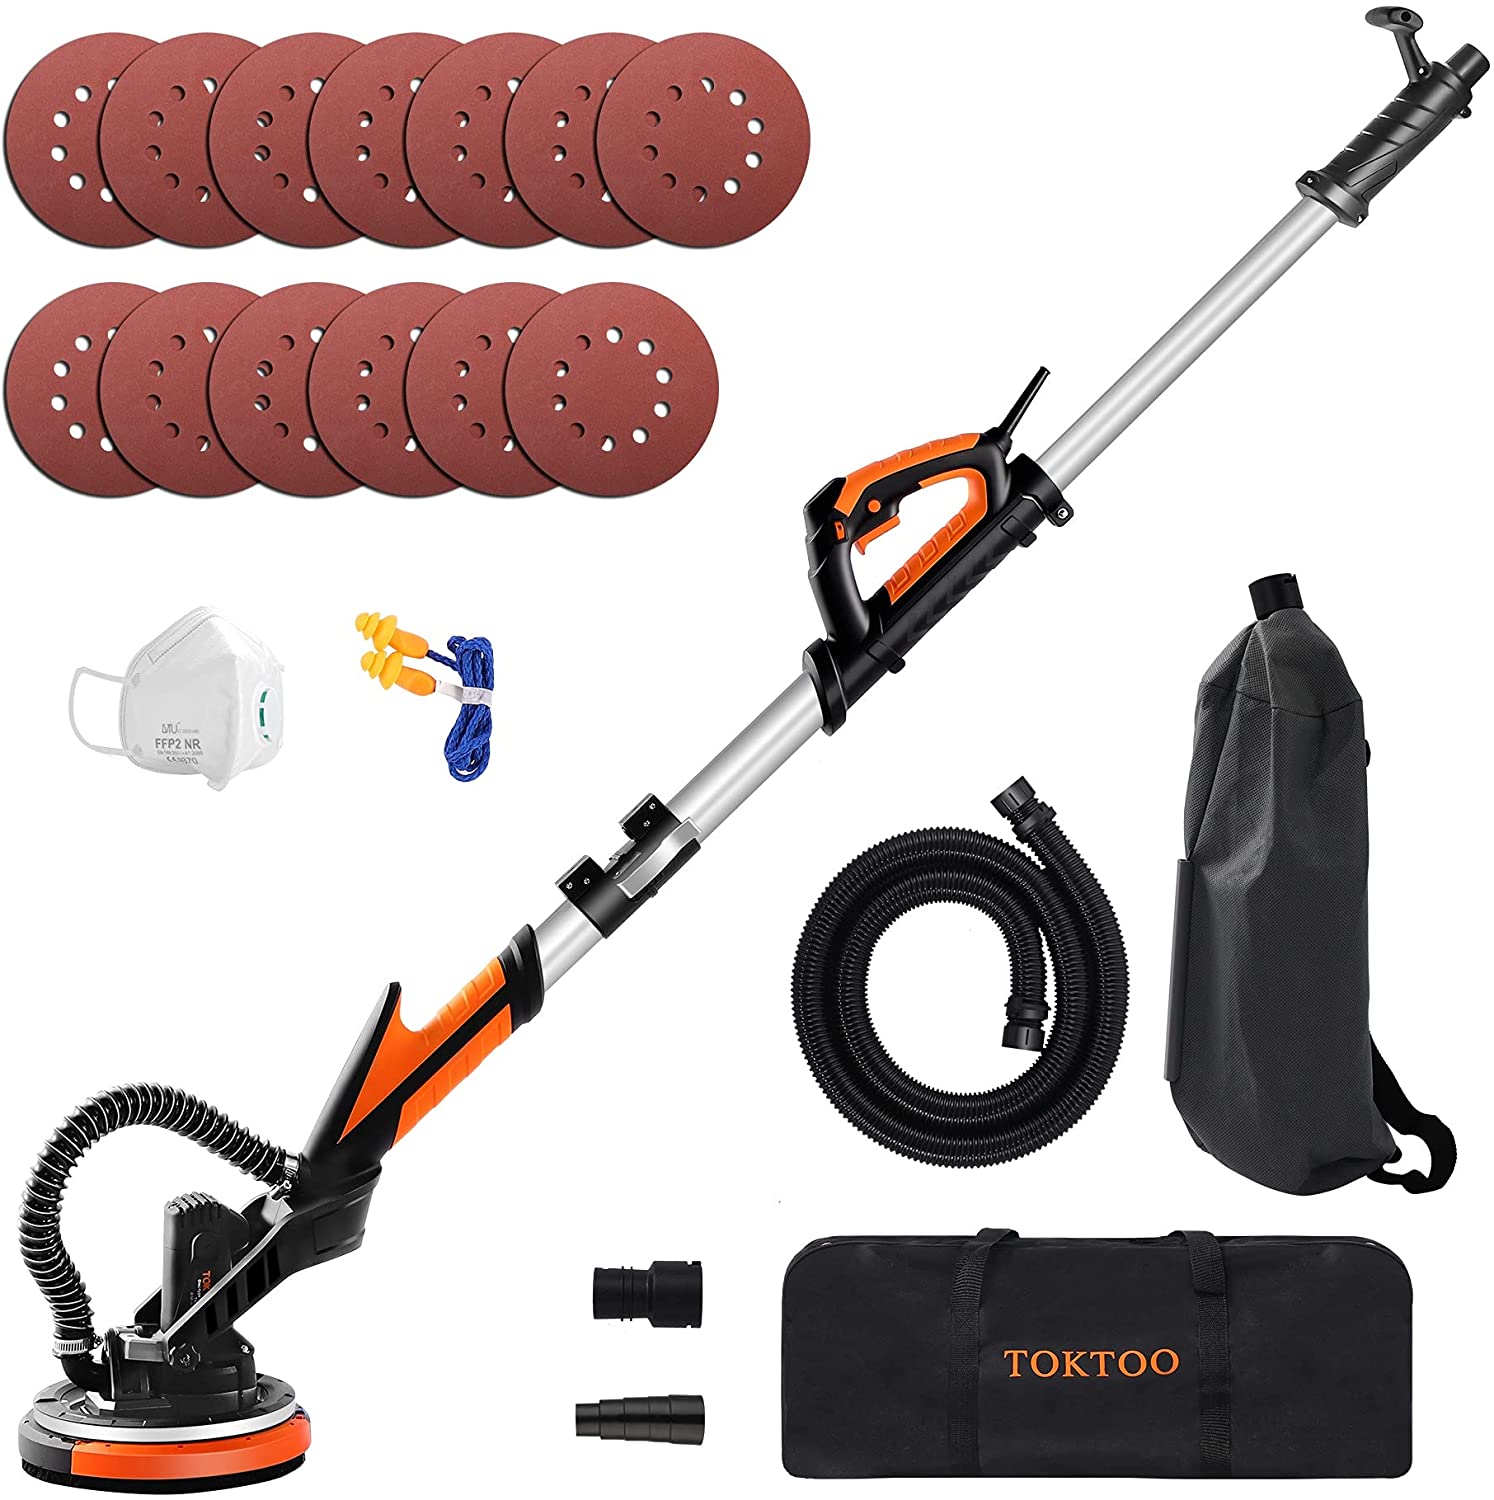 Drywall Sander, TOKTOO 800W Electric Drywall Sander with Vacuum Attachment, 13 Sanding Discs, LED and 6 Variable Speed, Extendable Handle and Carrying Bag